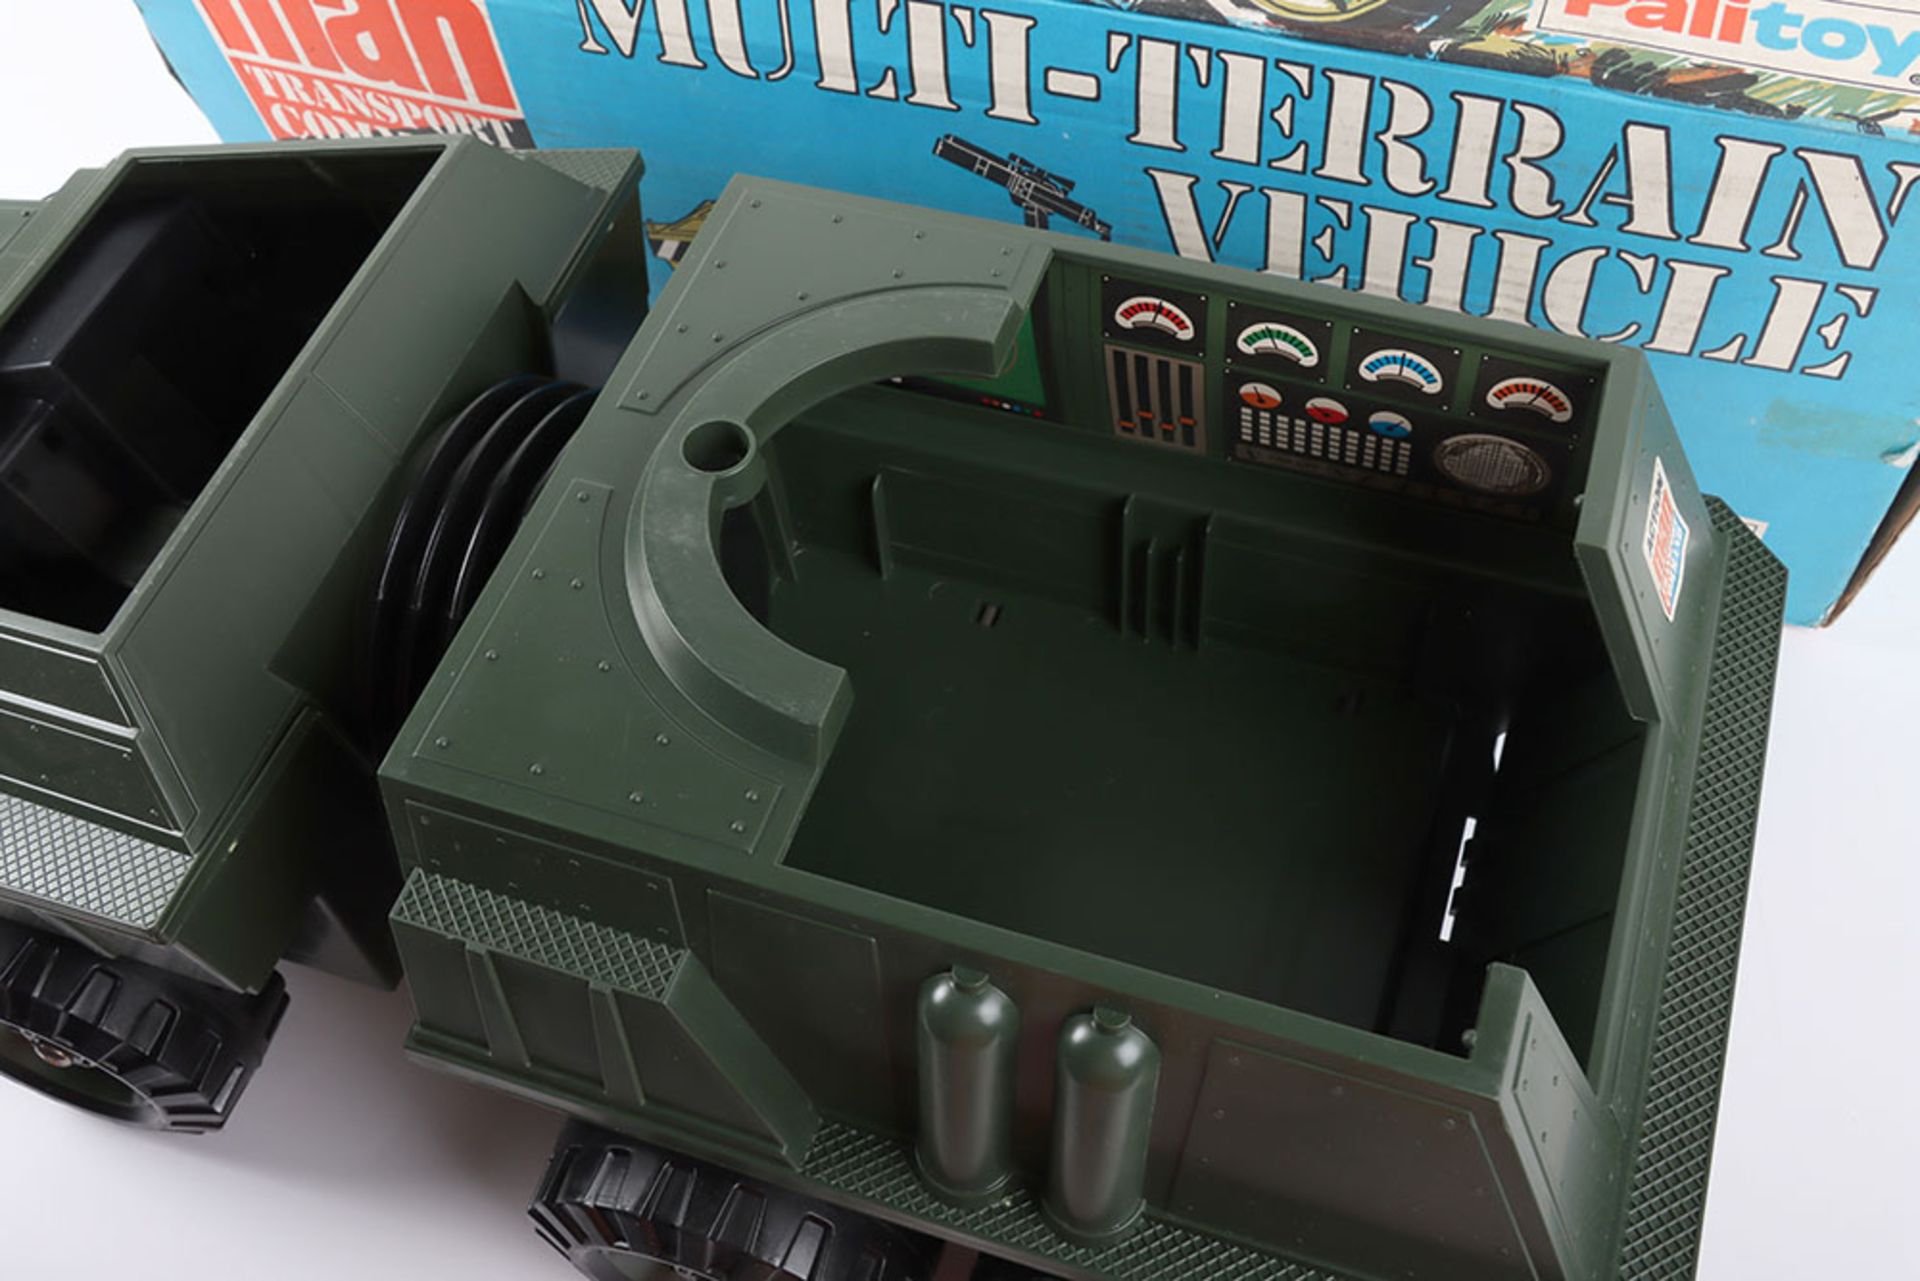 Palitoy Action Man Transport Command Multi-Terrain Vehicle - Image 2 of 8